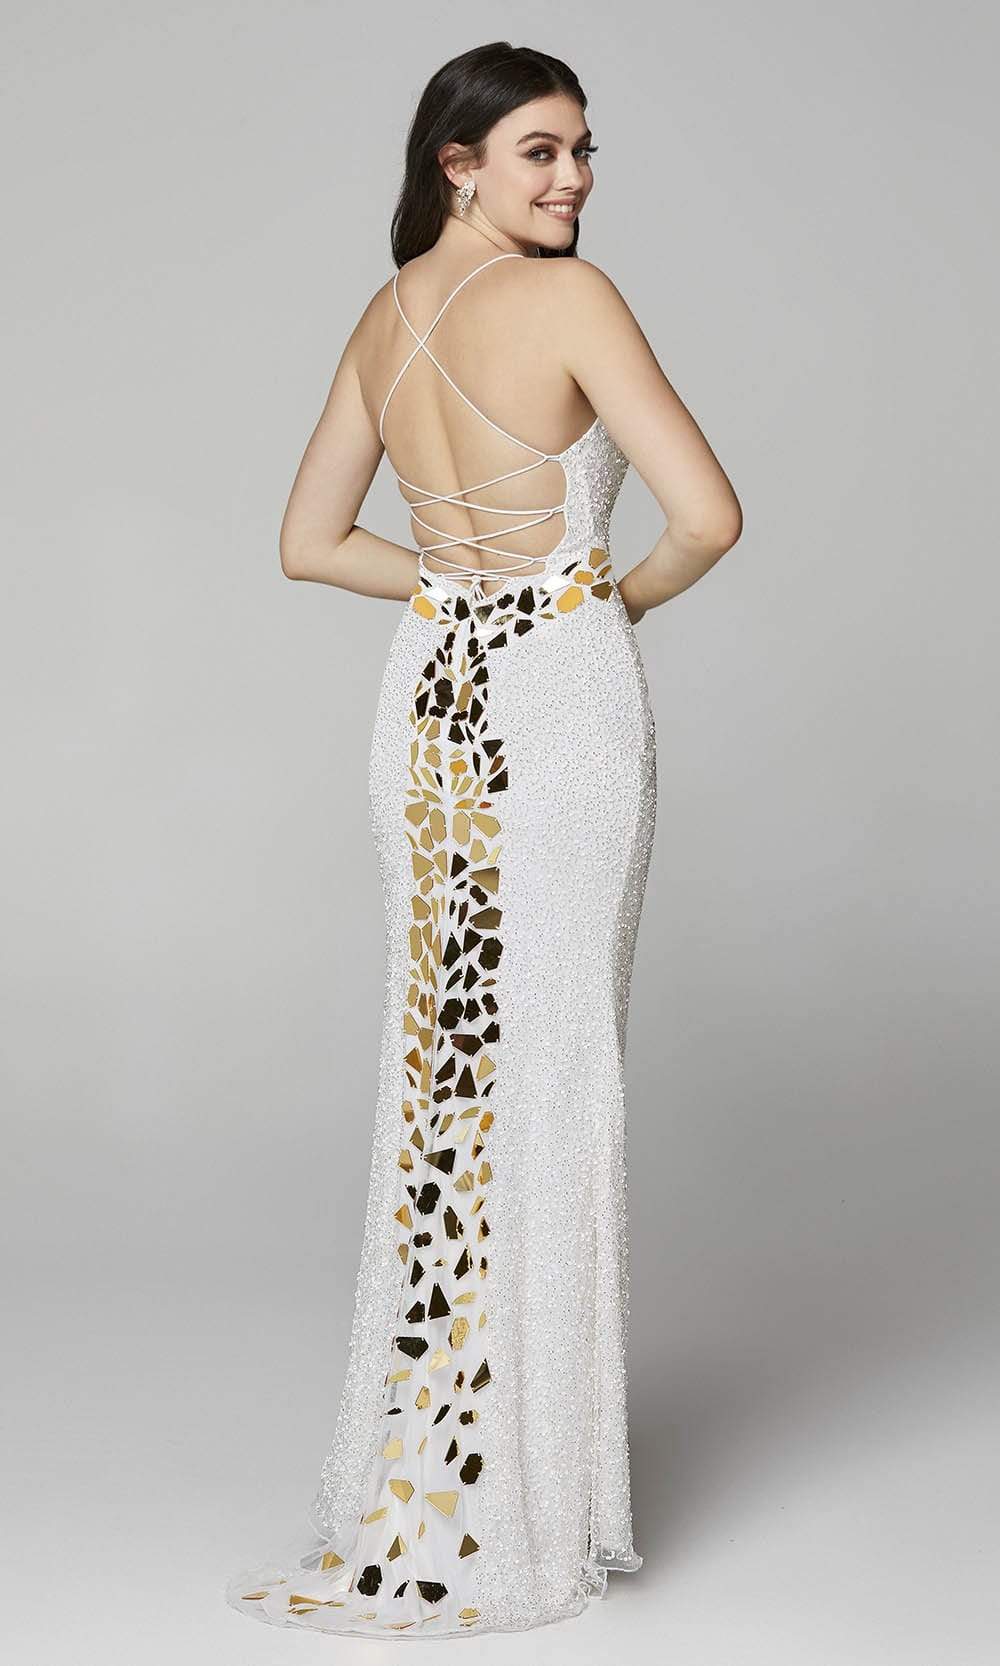 Primavera Couture - 3616 Fully Beaded Cut-Glass Accent Evening Dress Prom Dresses